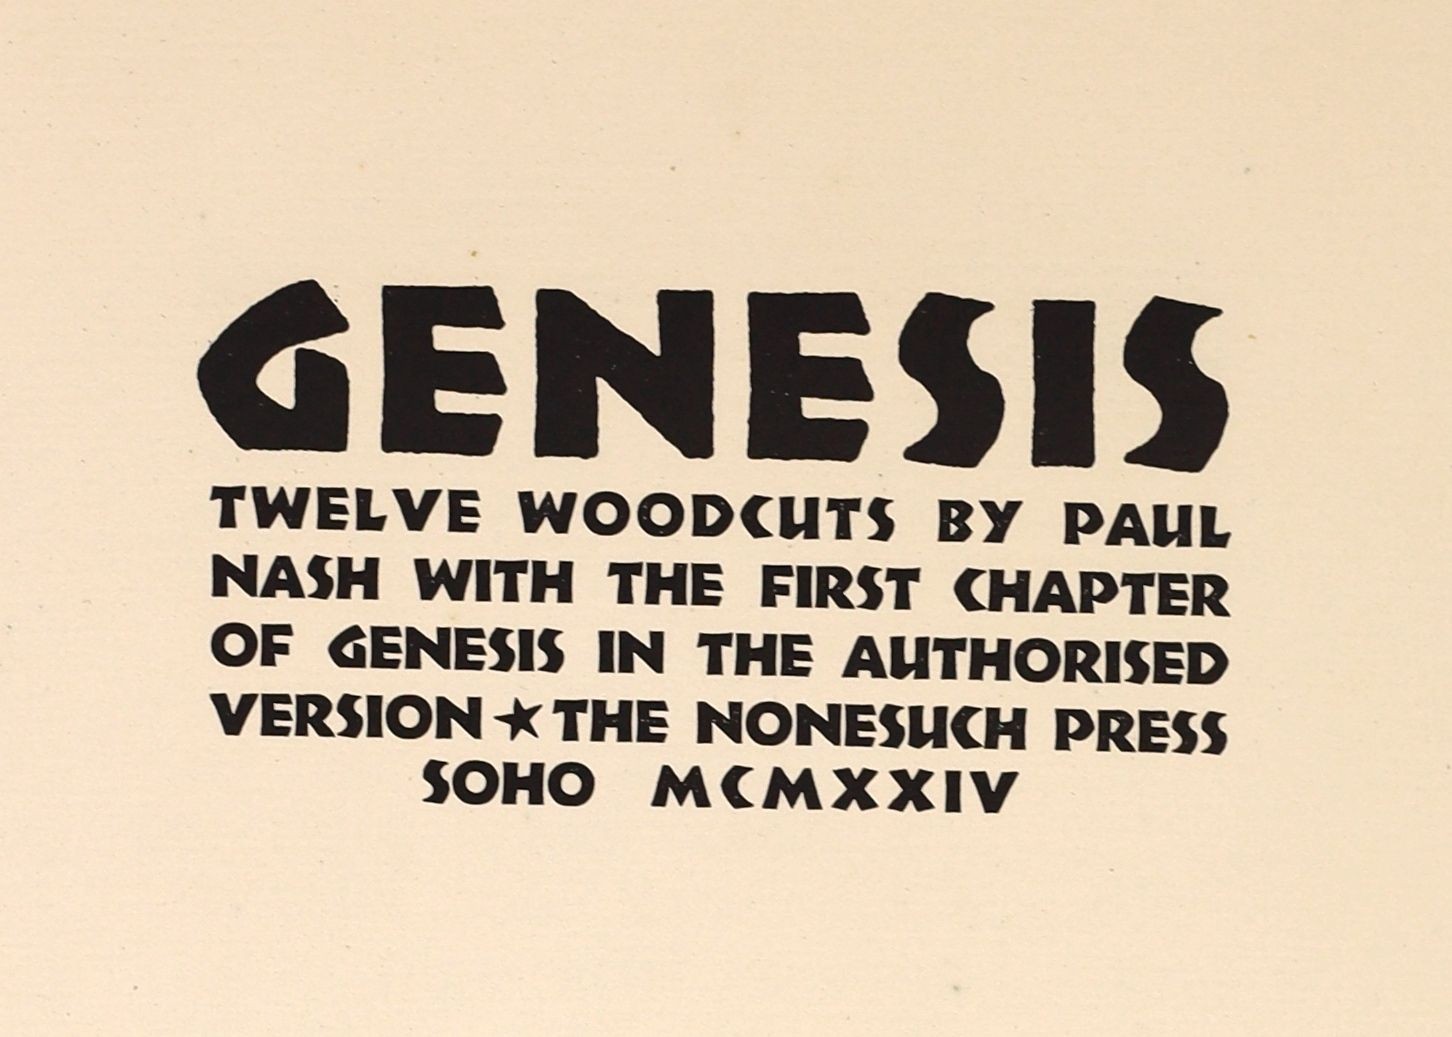 Bible in English - Nash, Paul [illustrator] - Genesis. Limited edition, one of 375, Authors presentation copy to his wife with signed inscription. Complete with 12 woodcut illustrations by Paul Nash. Original black paper